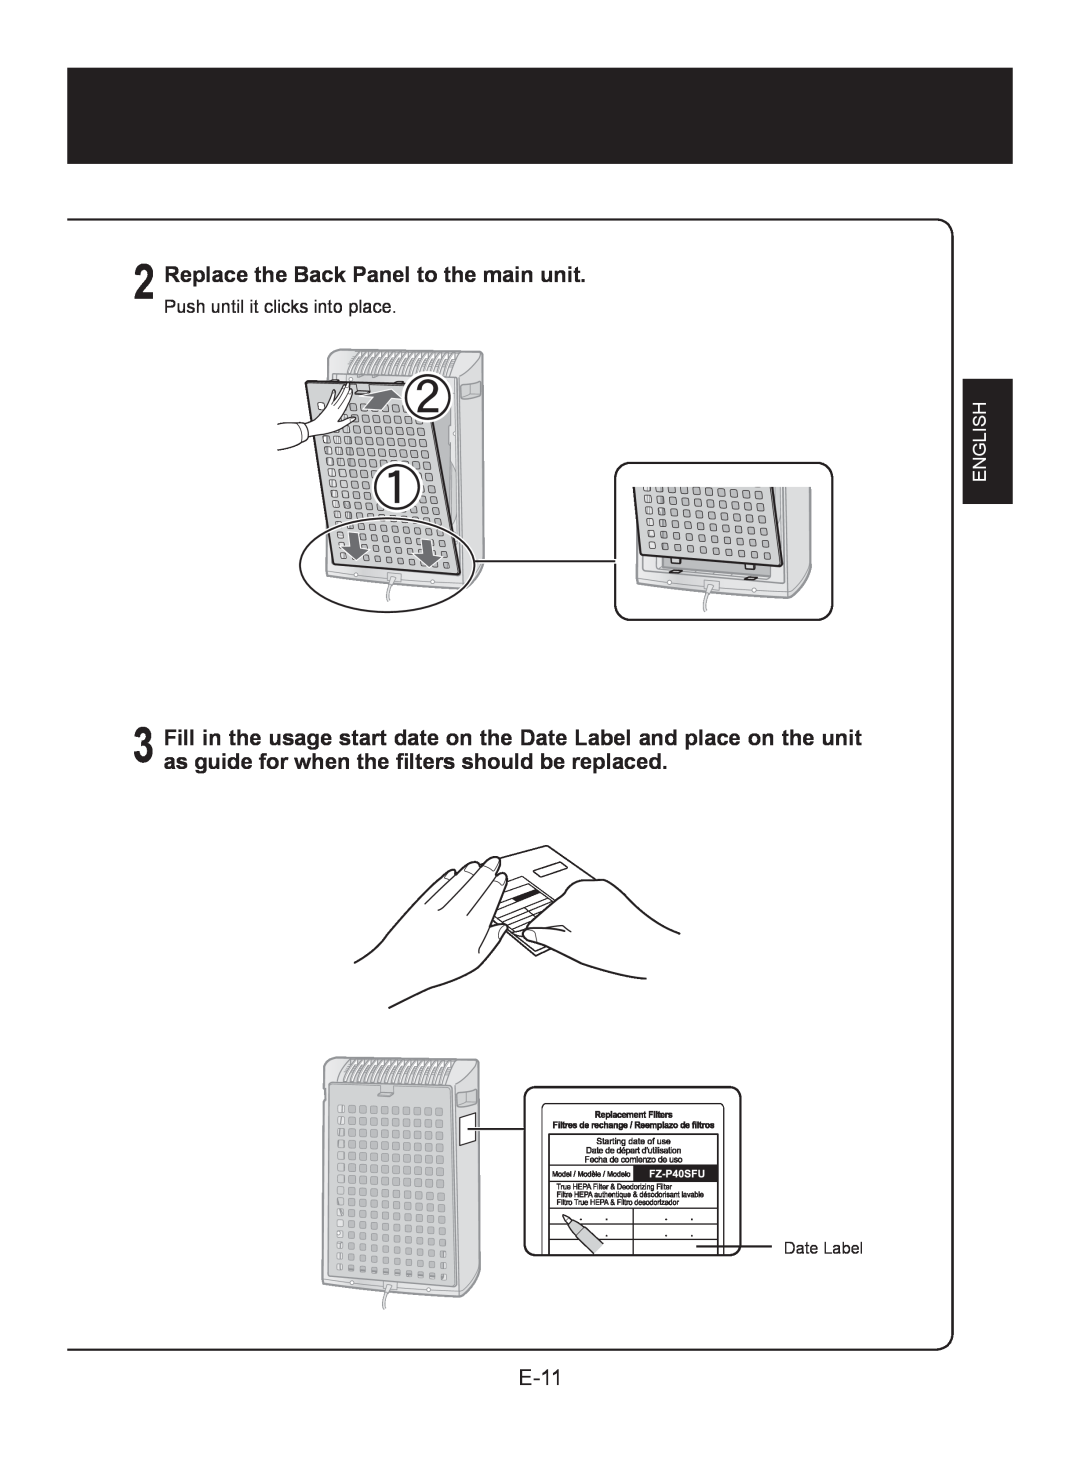 Sharp FP-A40C, FP-A40UW operation manual E-, Replace the Back Panel to the main unit, English 